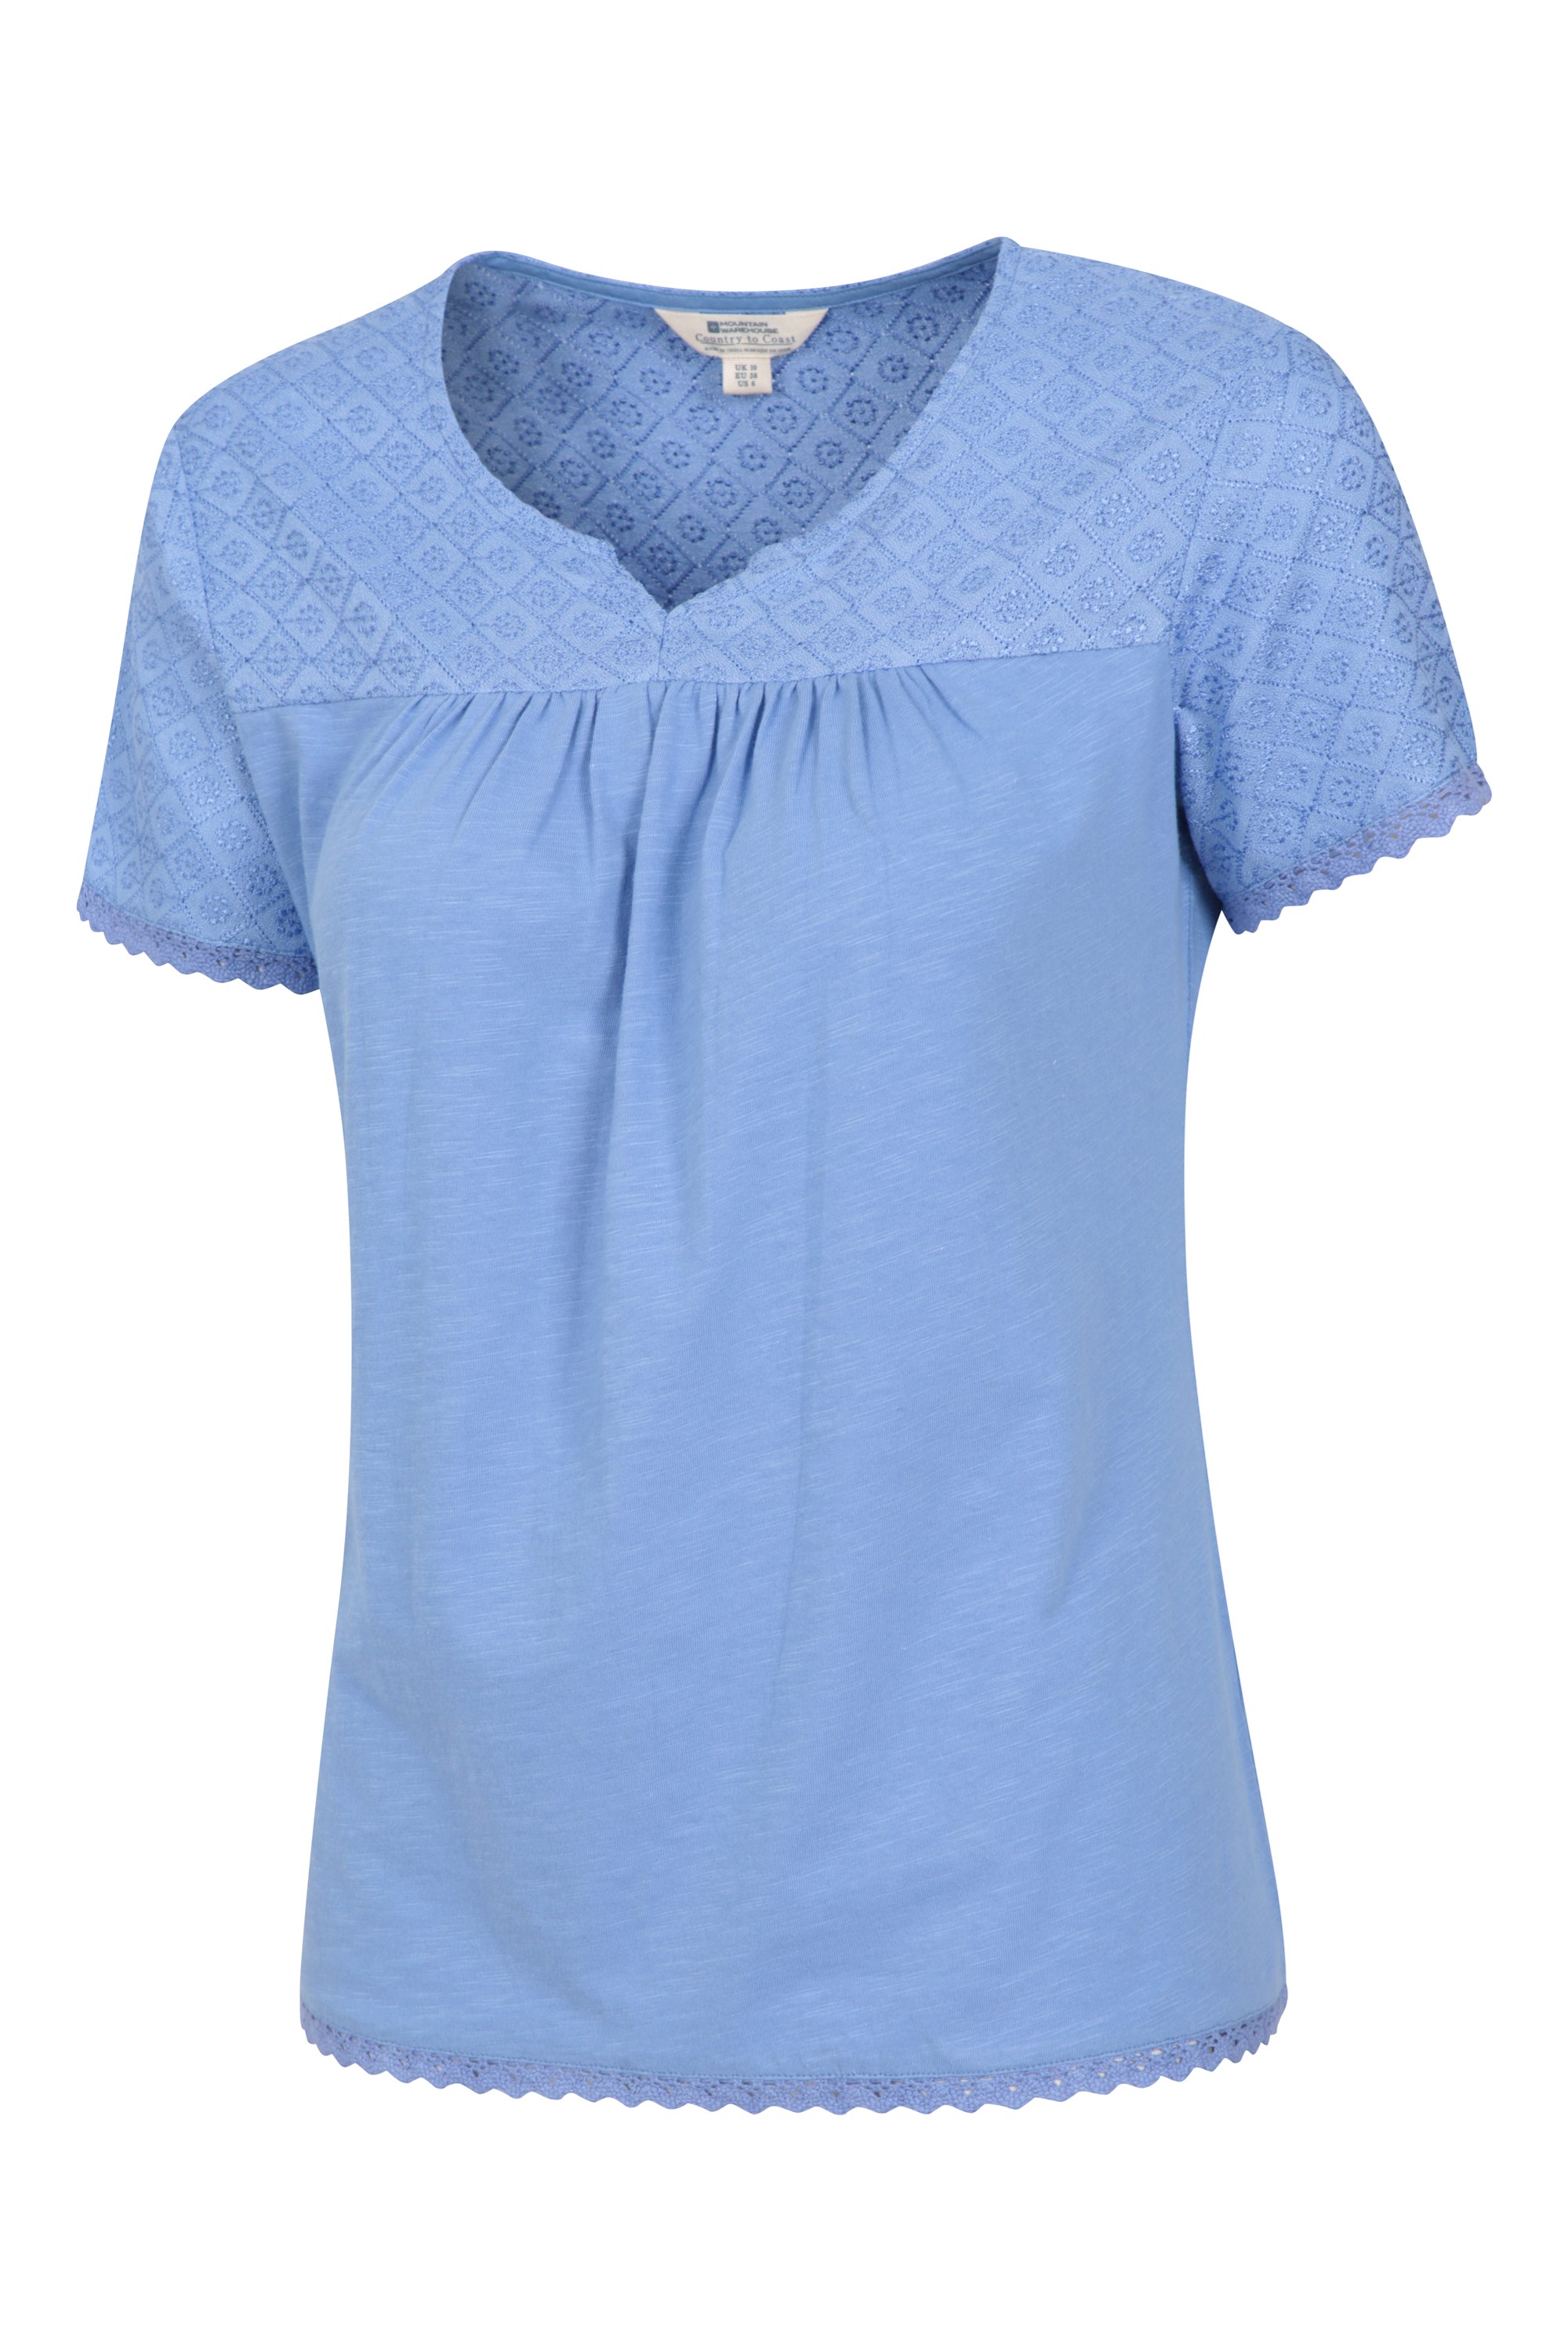 Naples Embroidered Womens Top